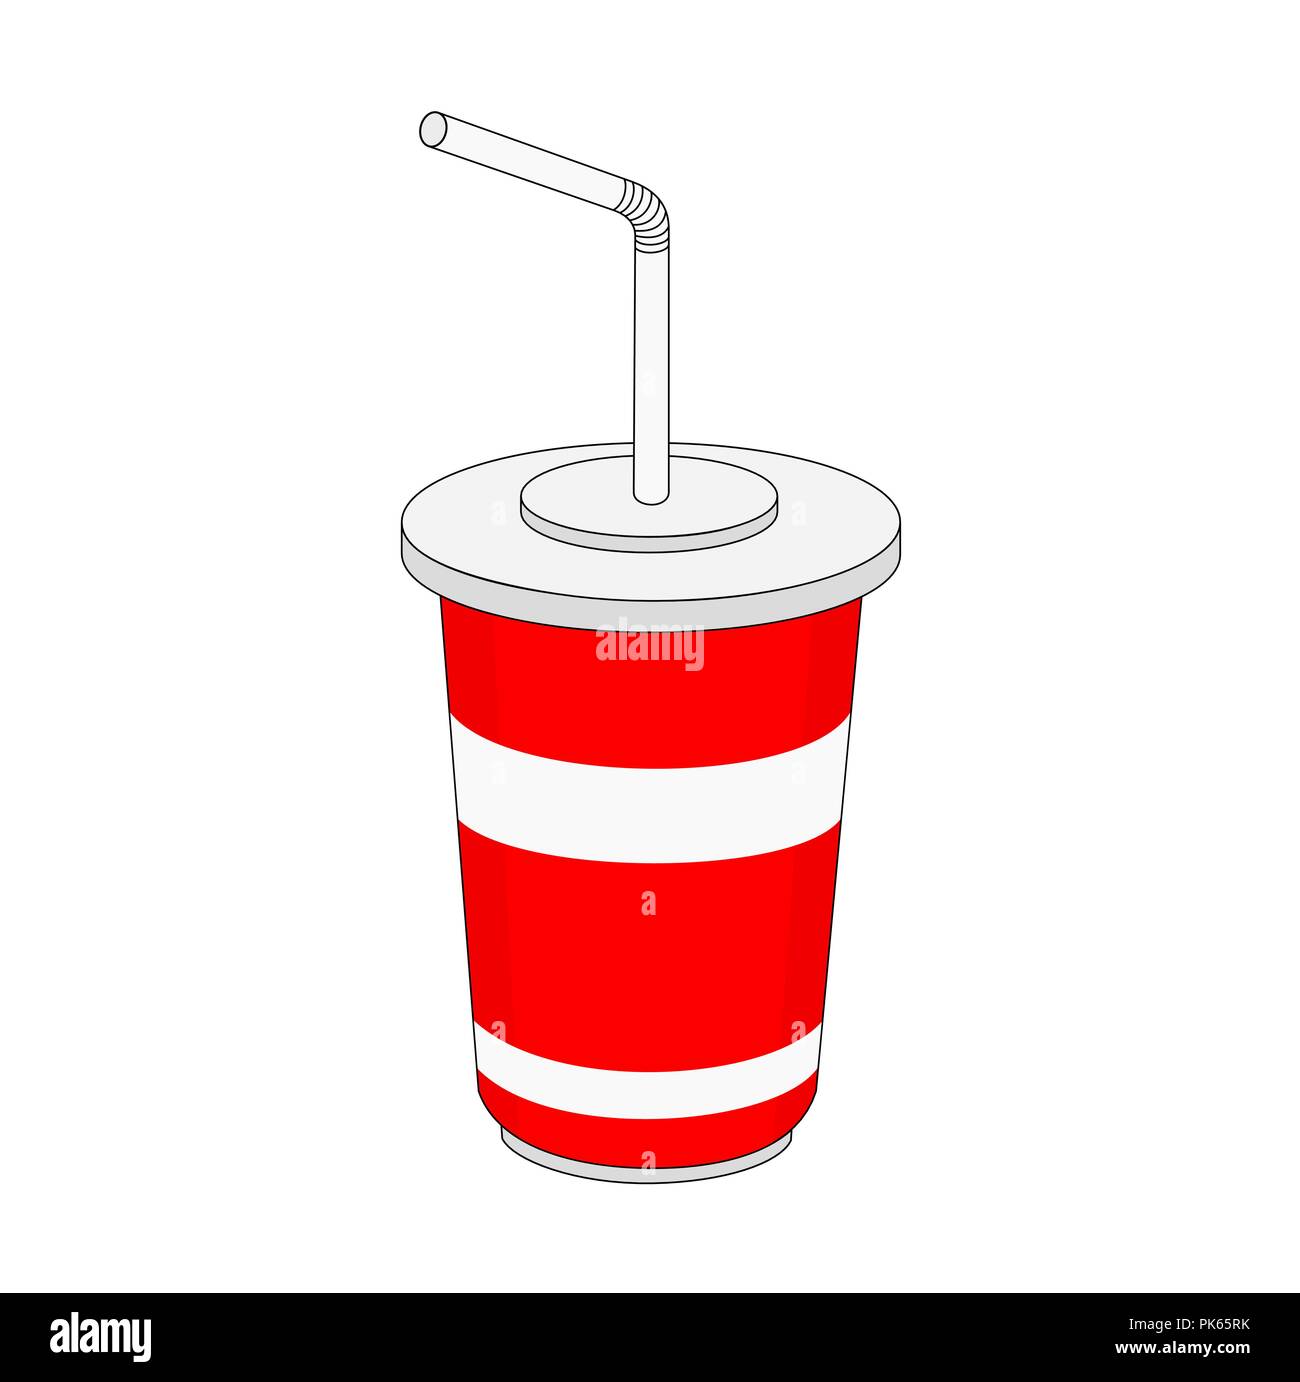 Breaking News: Fast Food Soda Tops Fit Red Cups! : r/pics